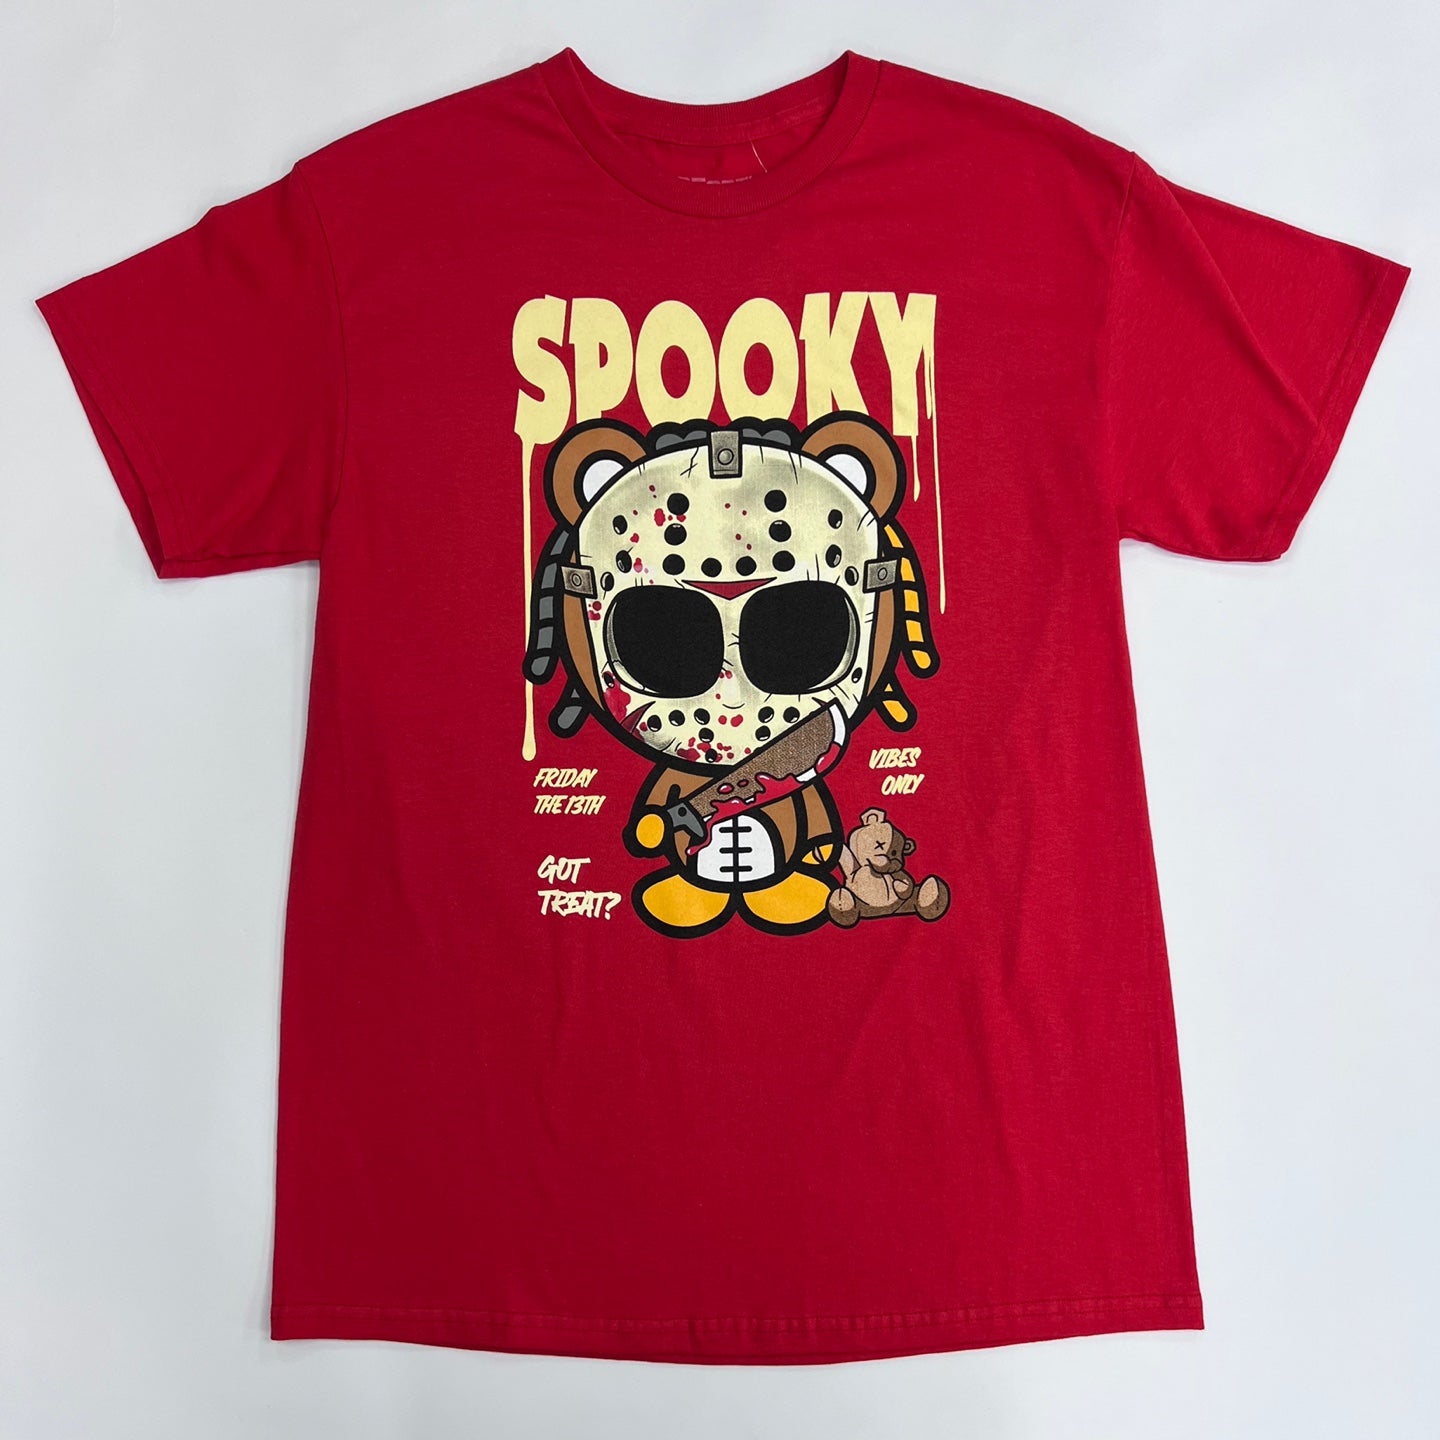 3FORTY Spooky Halloween Graphic T-Shirt - Red